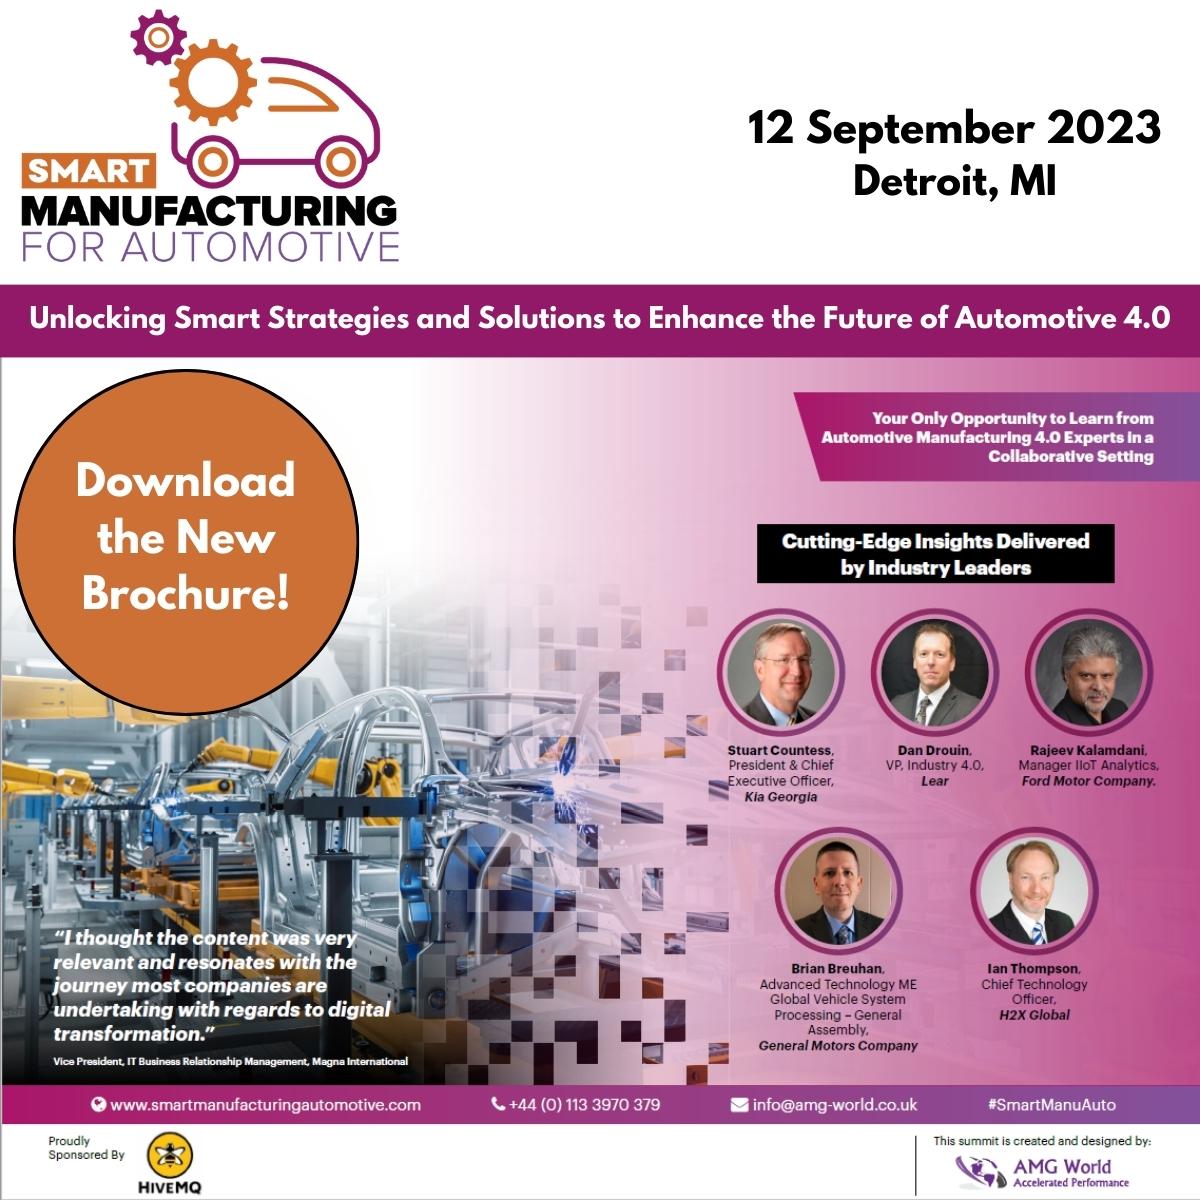 Unite with Automotive Smart Manufacturing leaders at the Smart Manufacturing for Automotive Summit in Detroit